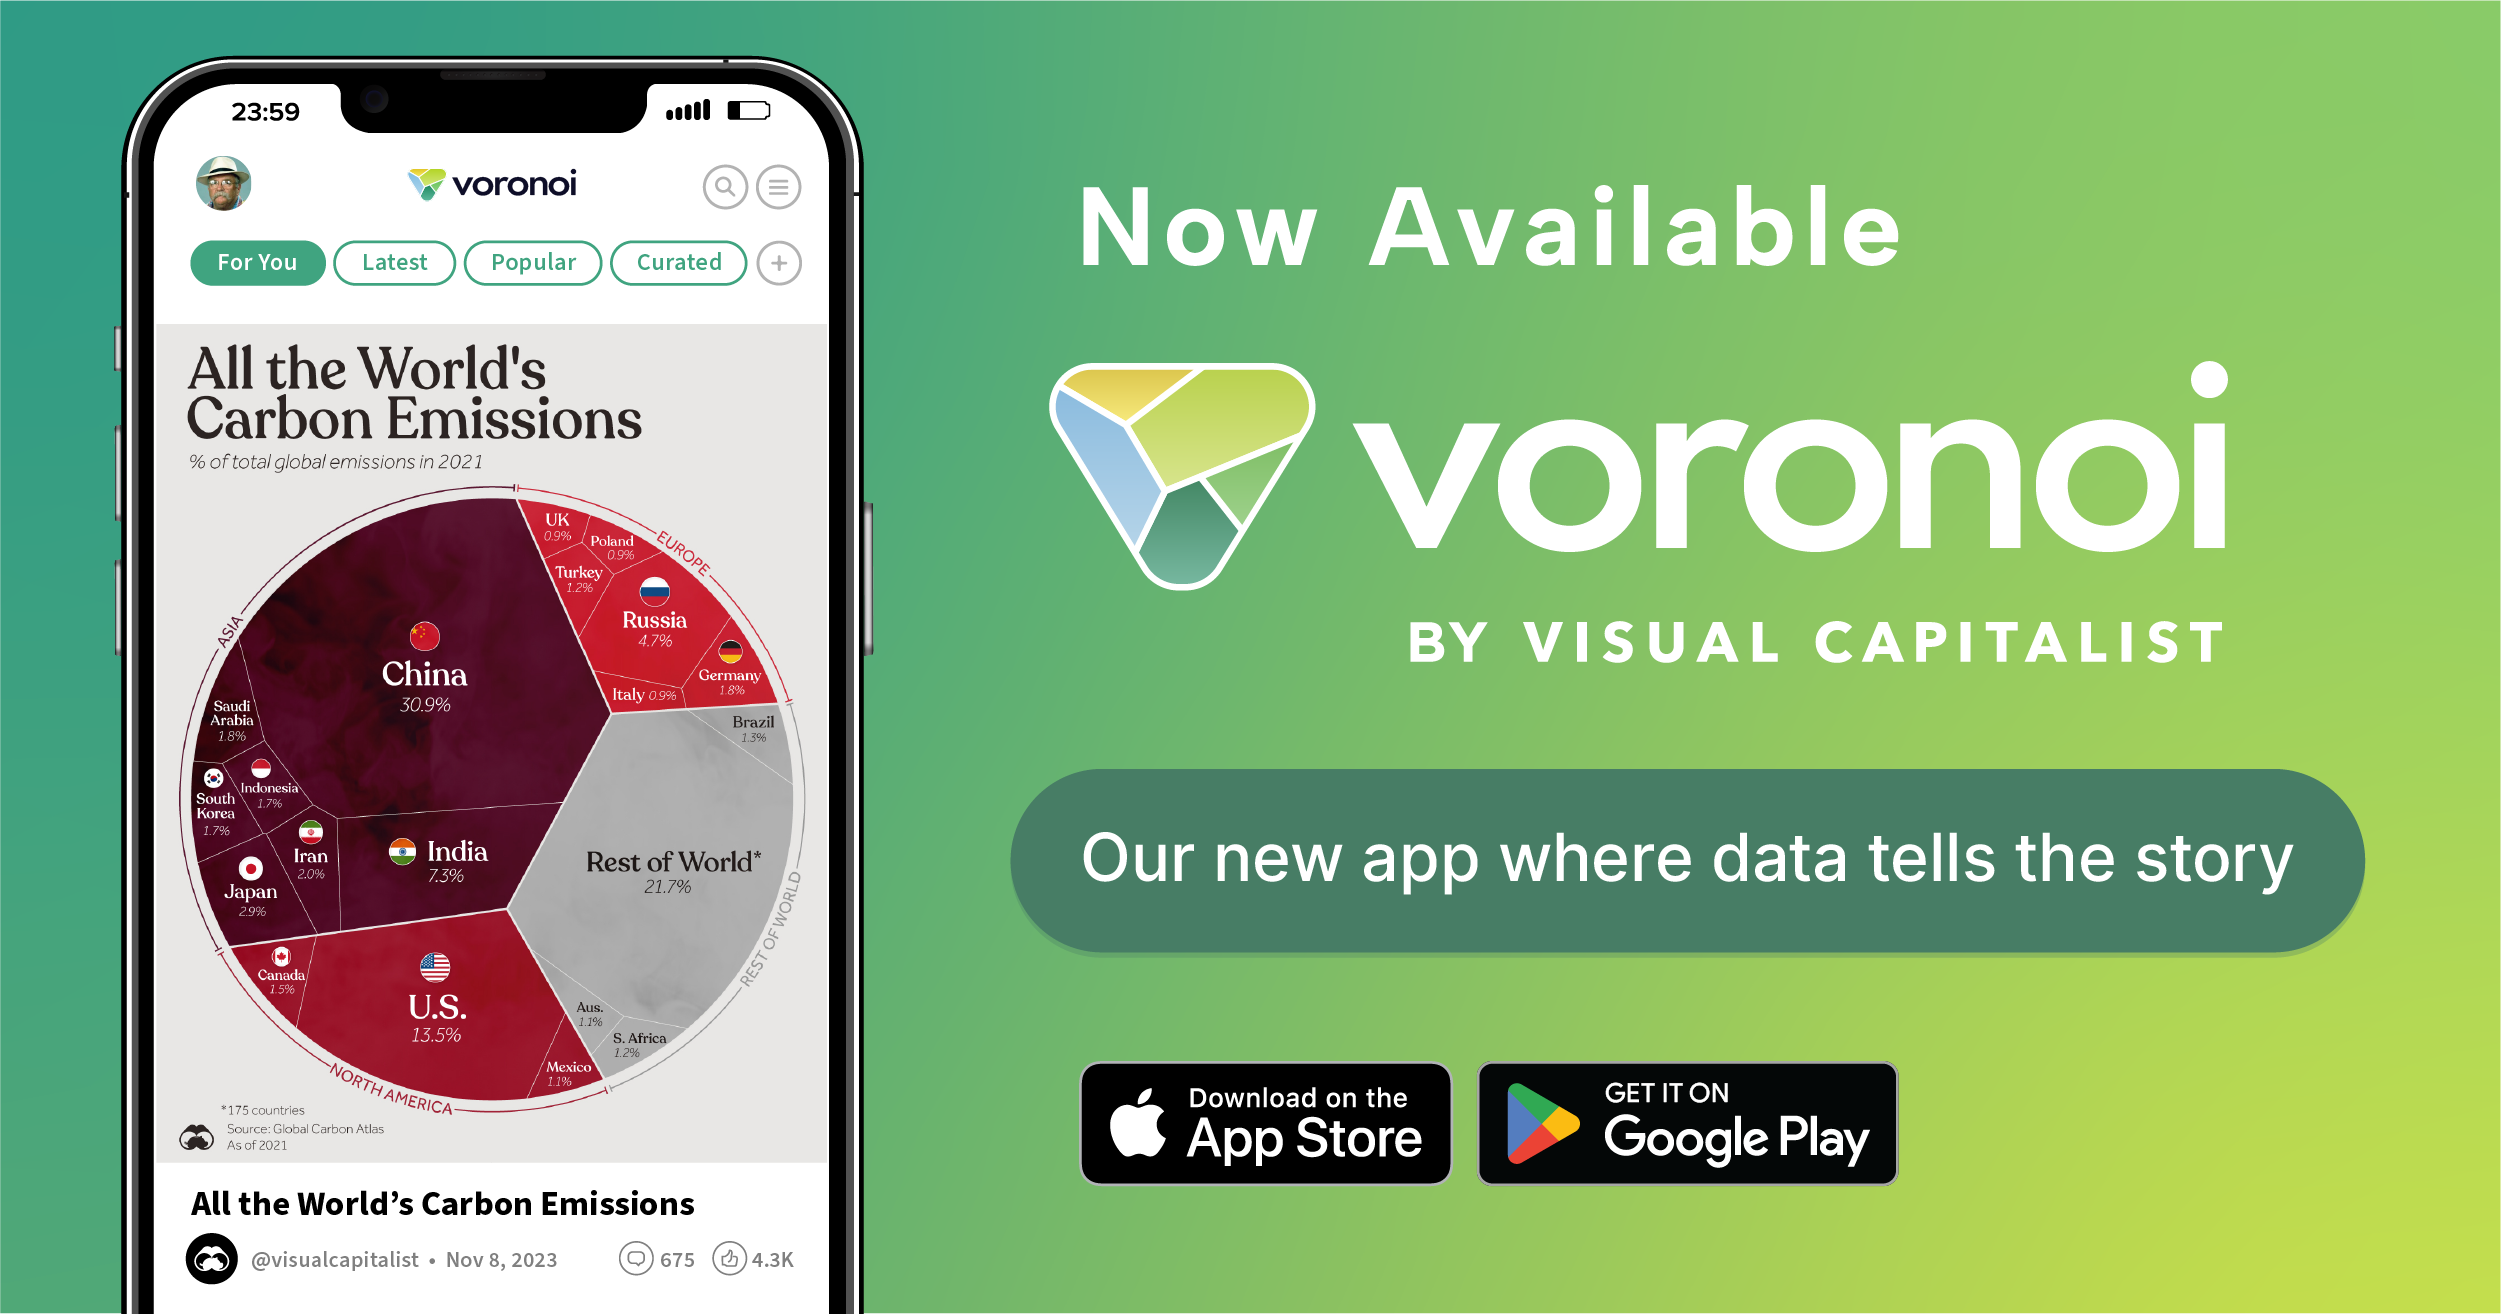 Voronoi by Visual Capitalist is now available to download.